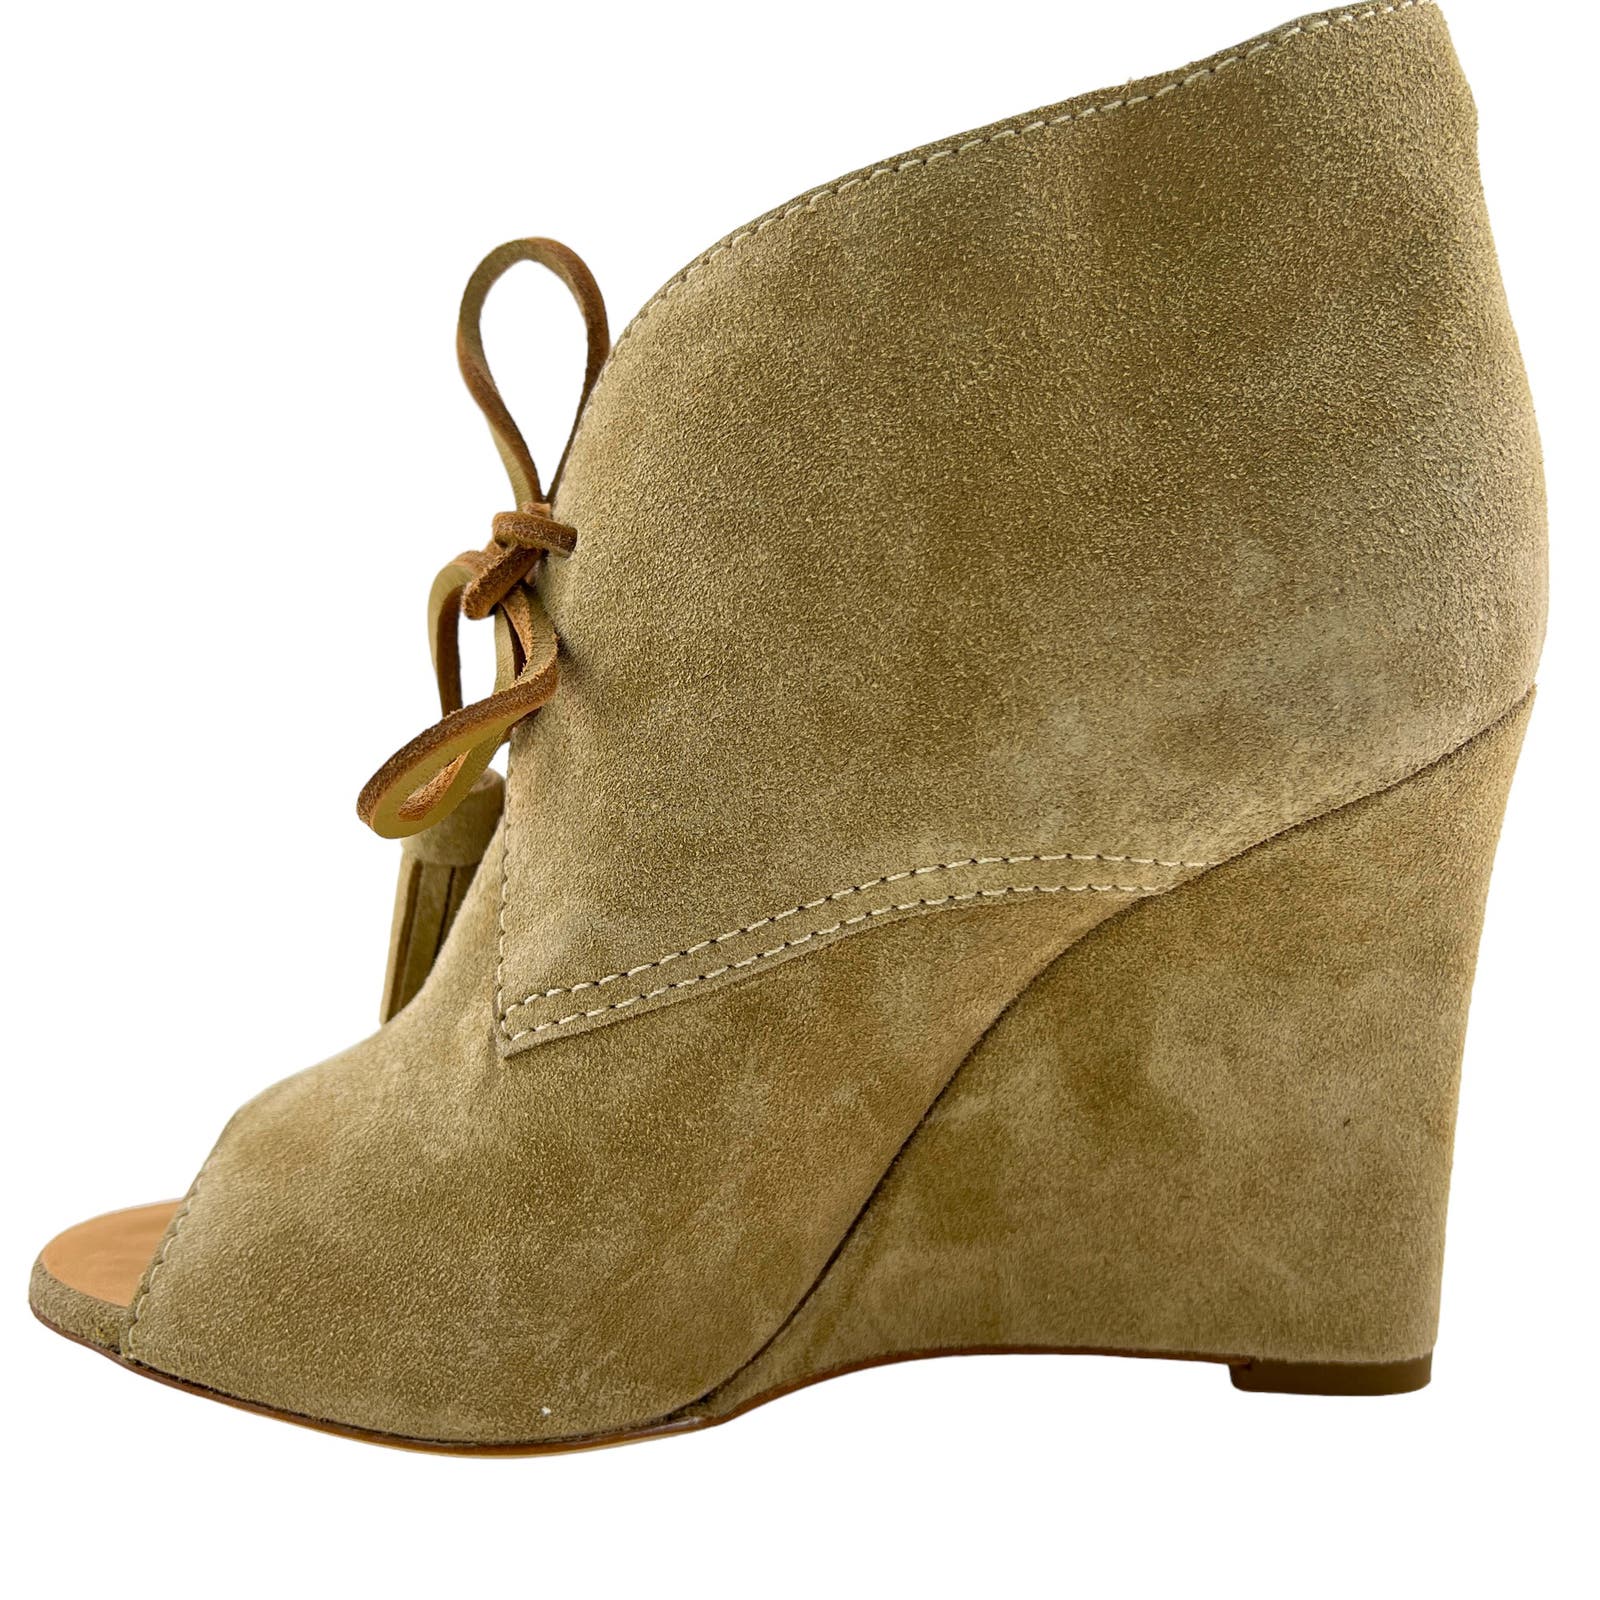 Dsquared2 Women US 7 Booties Suede Leather Peep Toe Wedge Heels Shoes